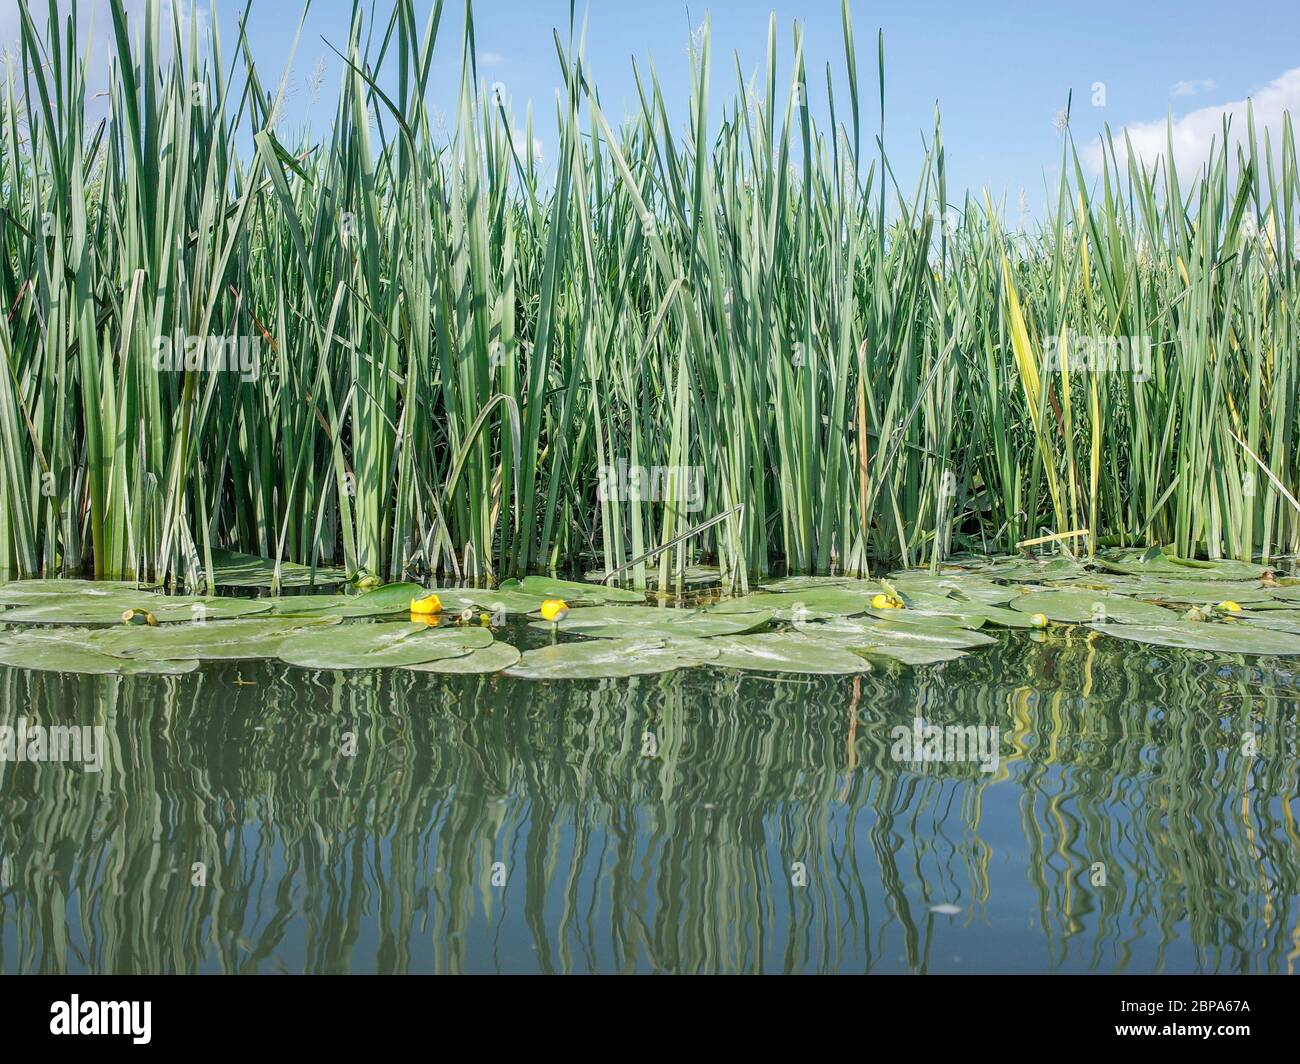 River Thames bank of reeds- Oxfordshire- UK Stock Photo